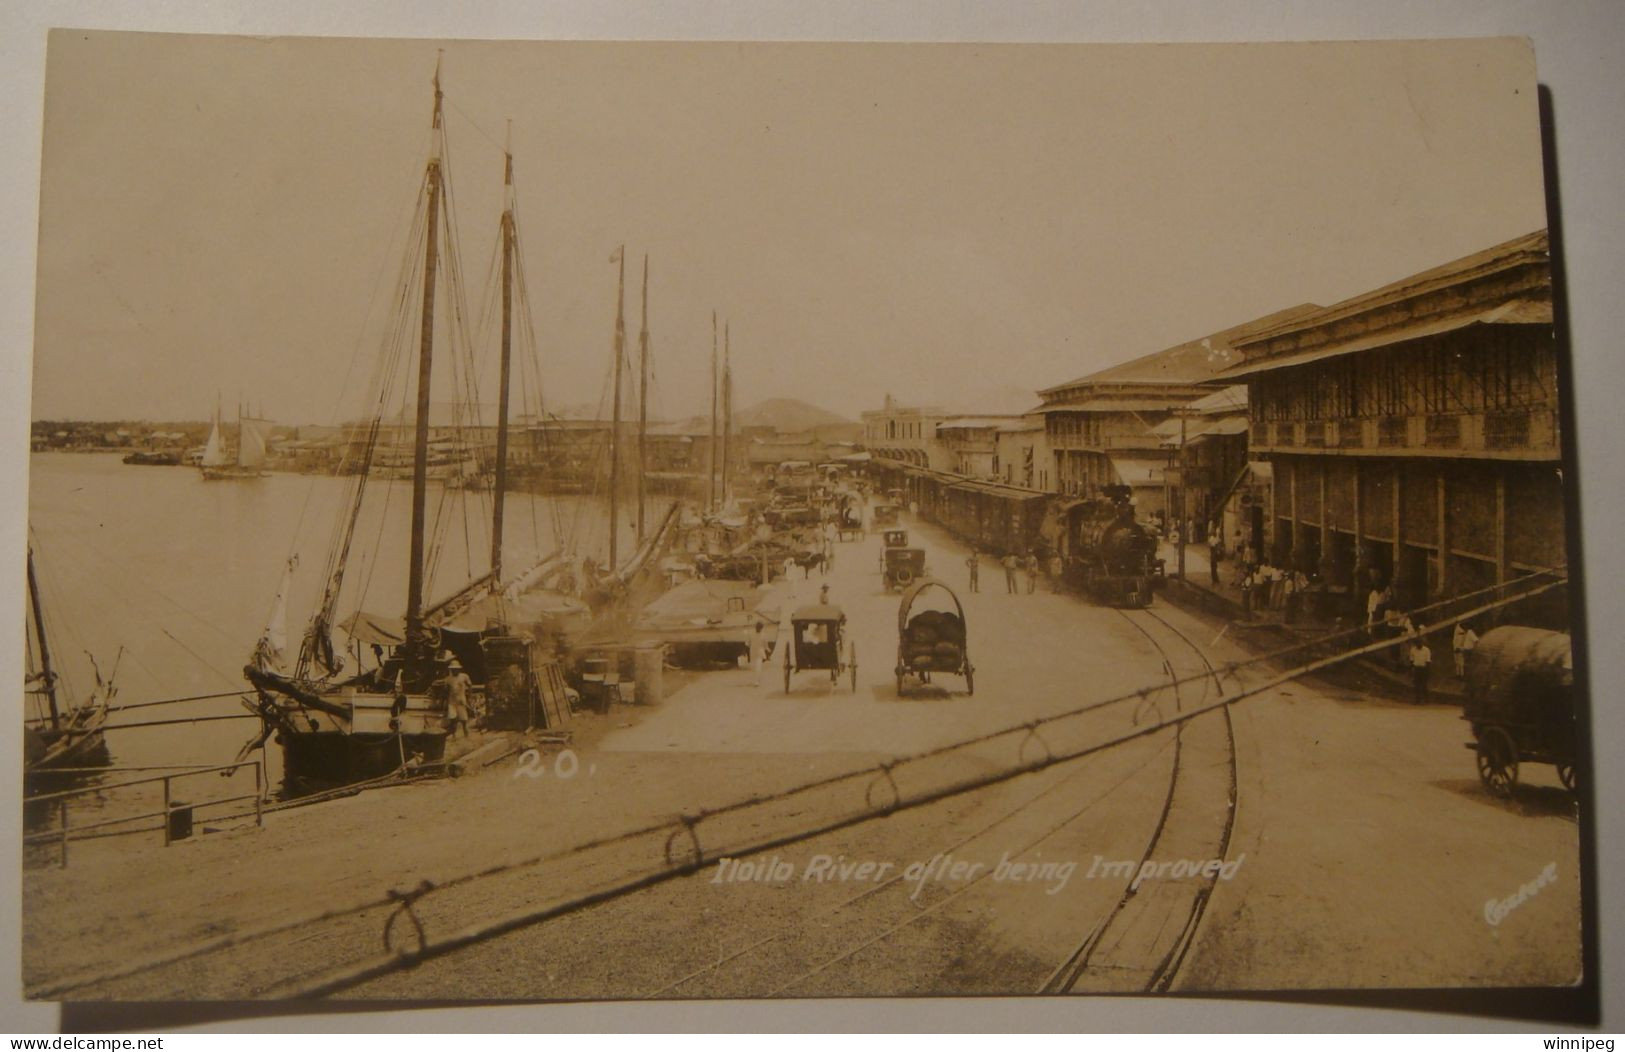 Iloilo,Philippines.Iloilo River After Being Improved.Railway,steamer,sail Boats,cars.cartsCasanave RPPC.1930. - Philippinen